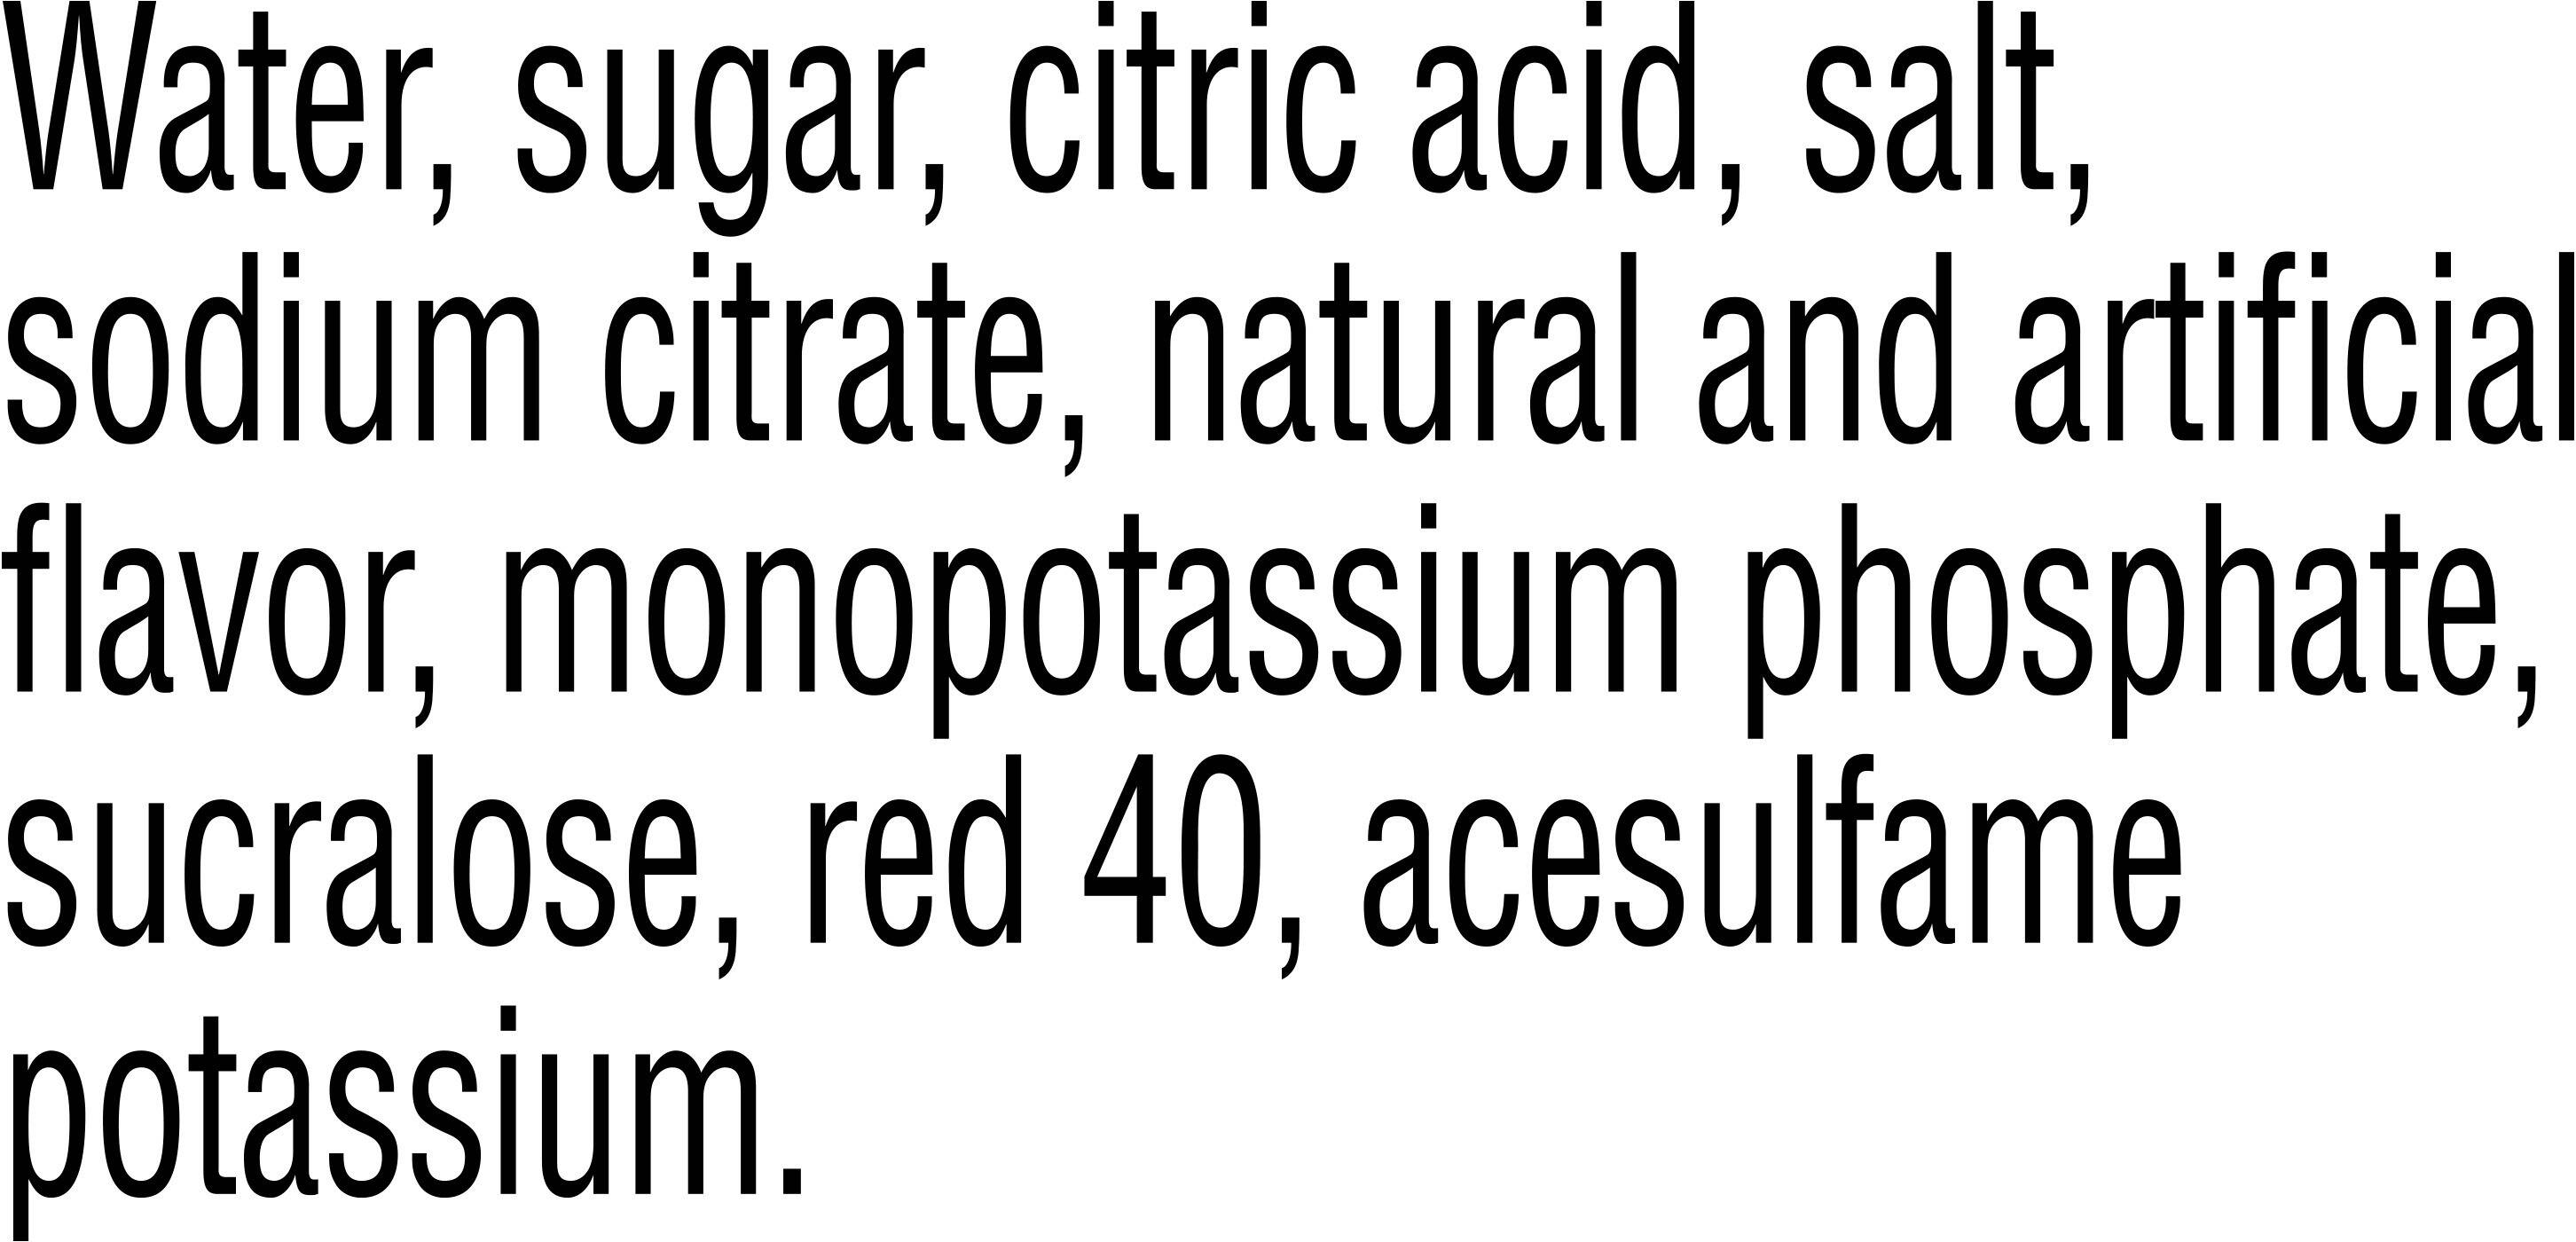 Image describing nutrition information for product Gatorade G2 Fruit Punch